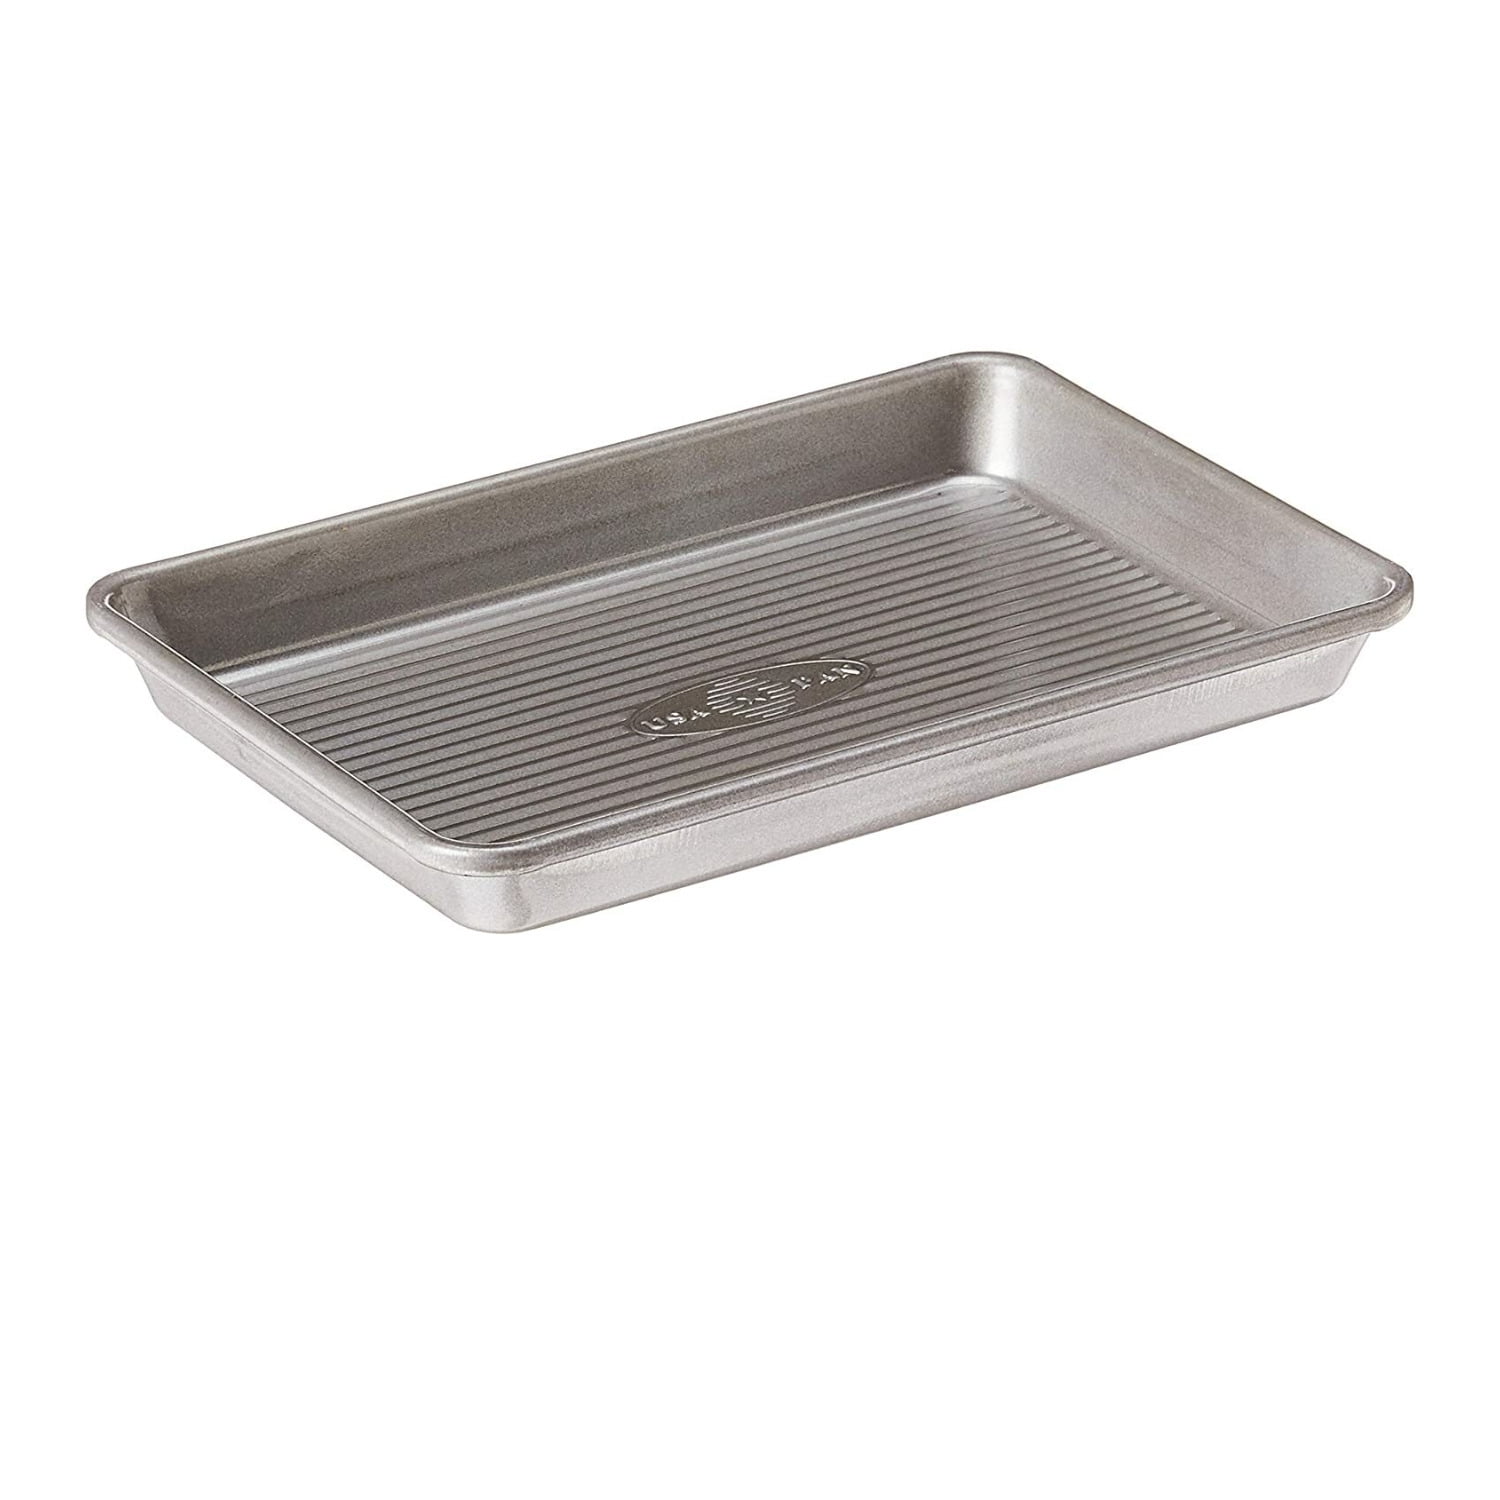 Textured Aluminum Small Cookie/Baking Sheet, 9-inch-by-13-inch, Silver -  AliExpress